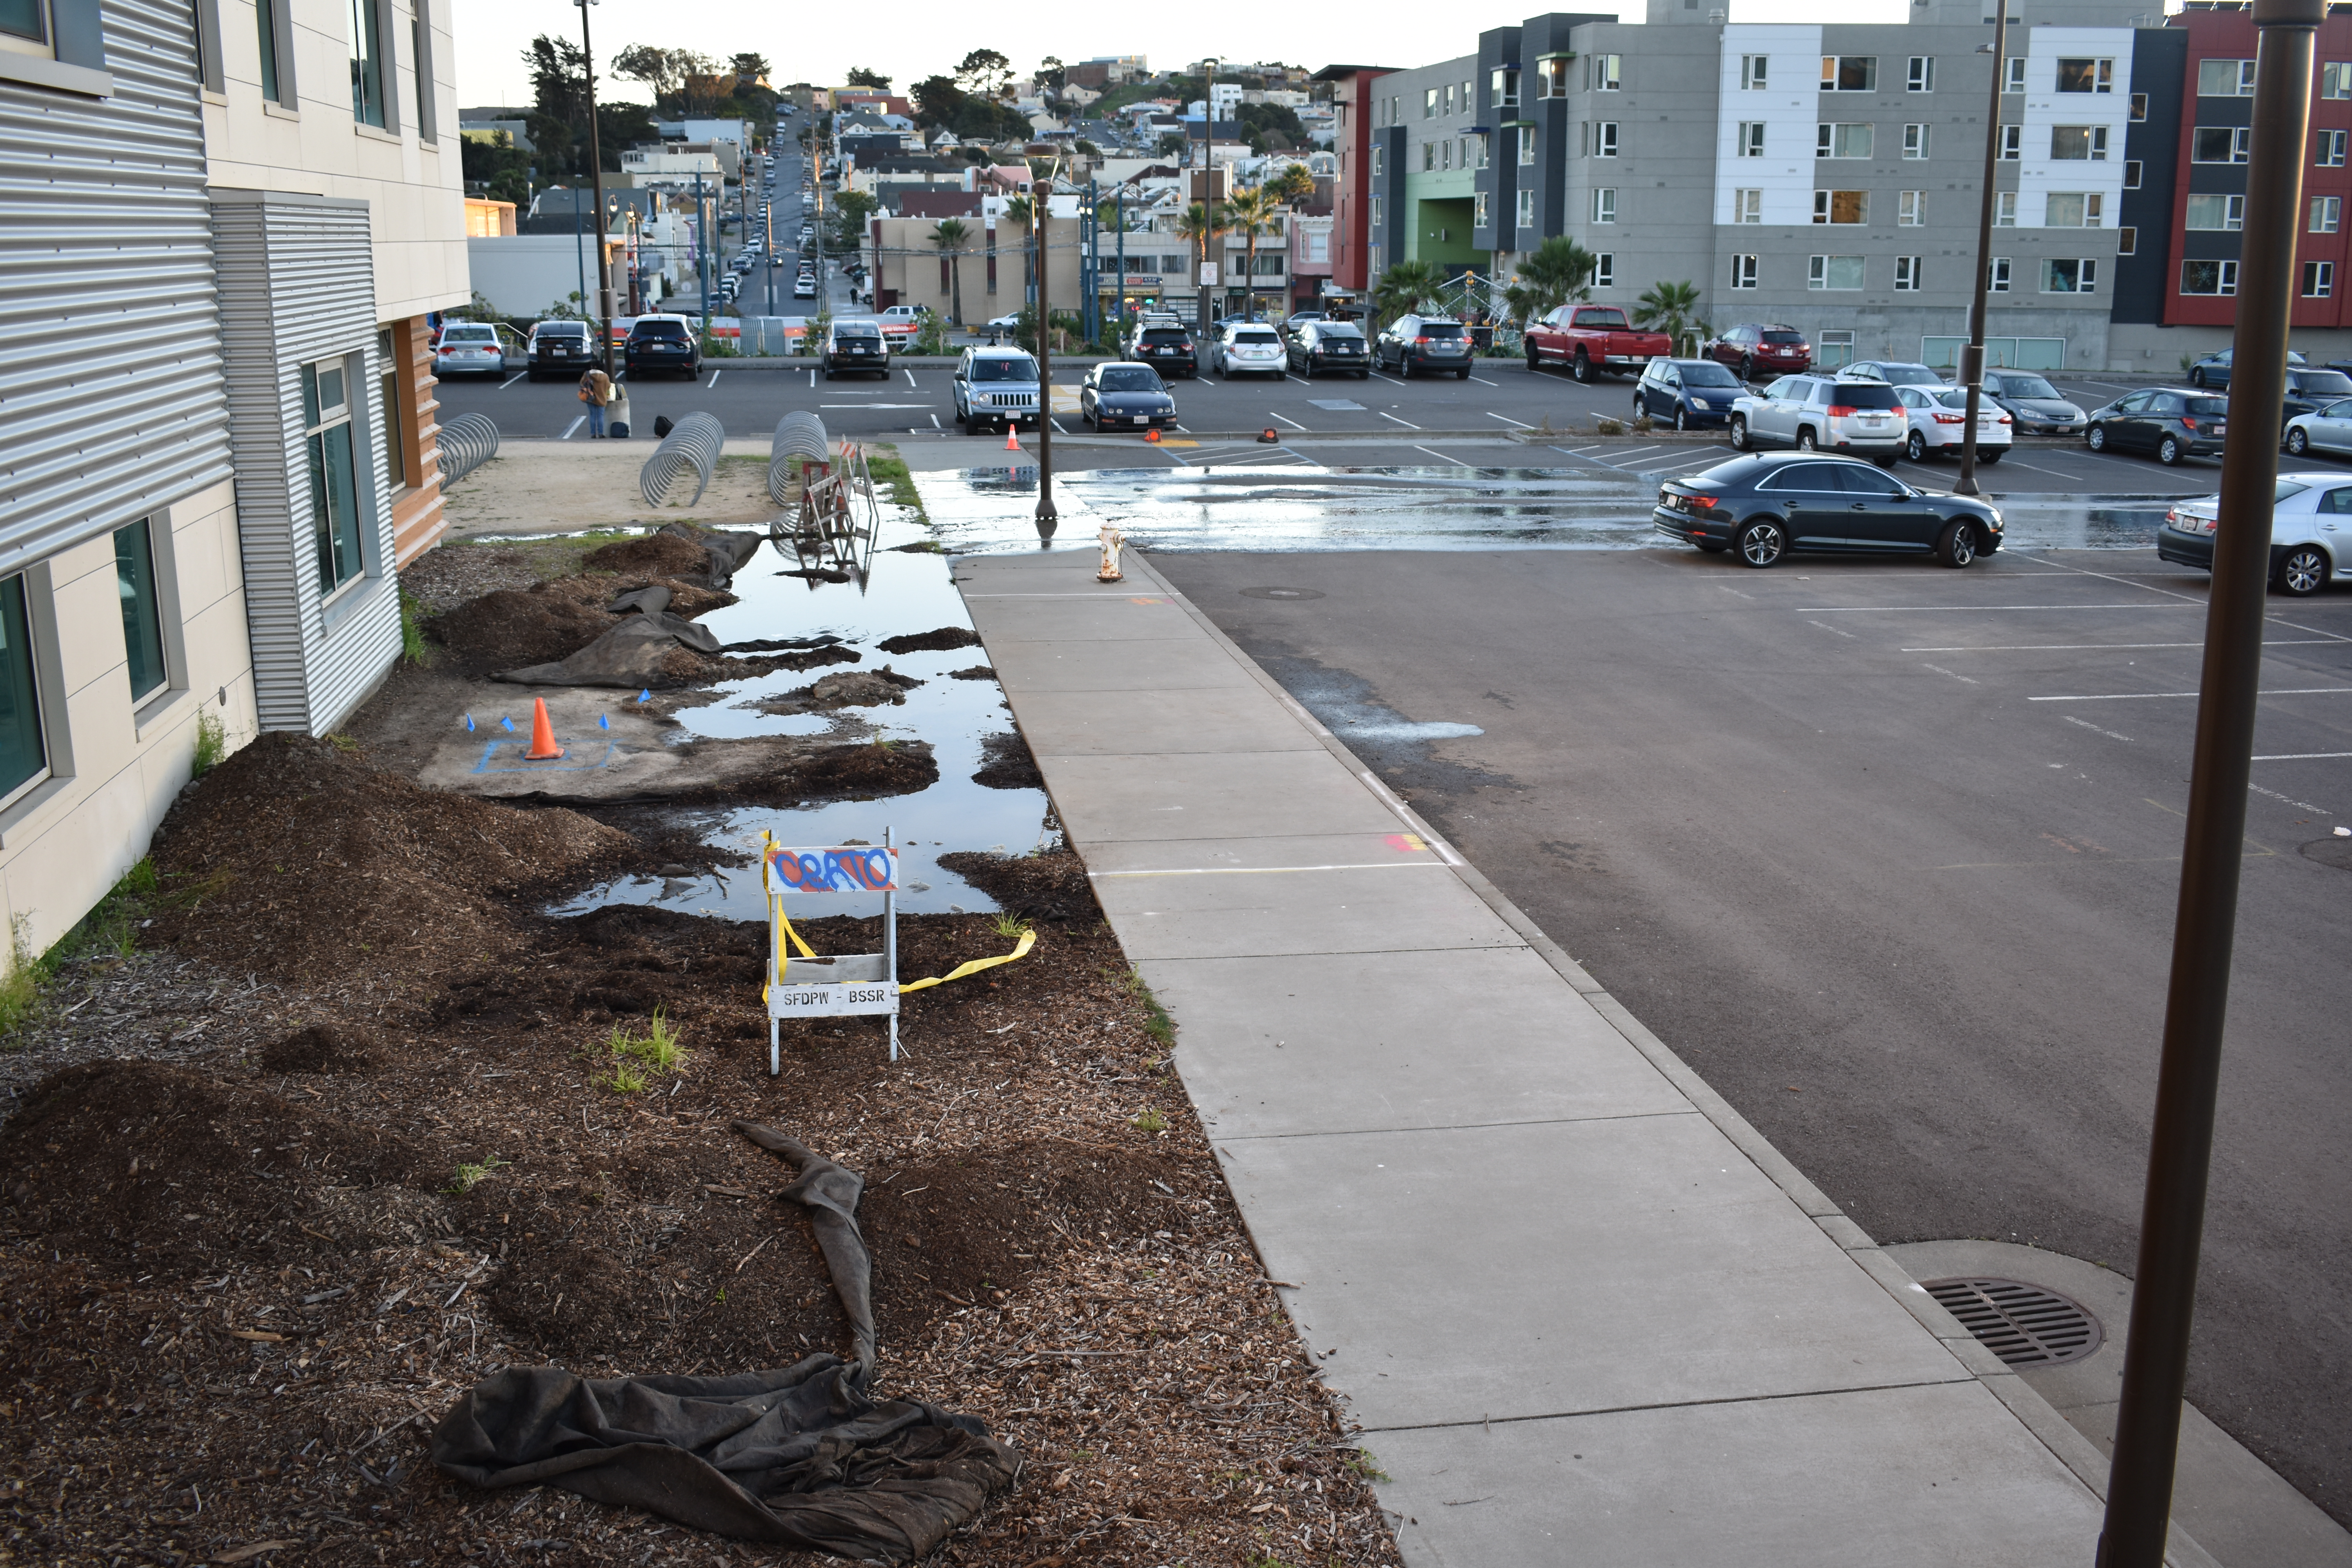 A water leak from the Ocean Campus Multi-Use Building (MUB) formed puddles in the ground and drained into the adjacent parking lot (not shown). Feb. 13, 2018. Photo by Michael Menaster/The Guardsman